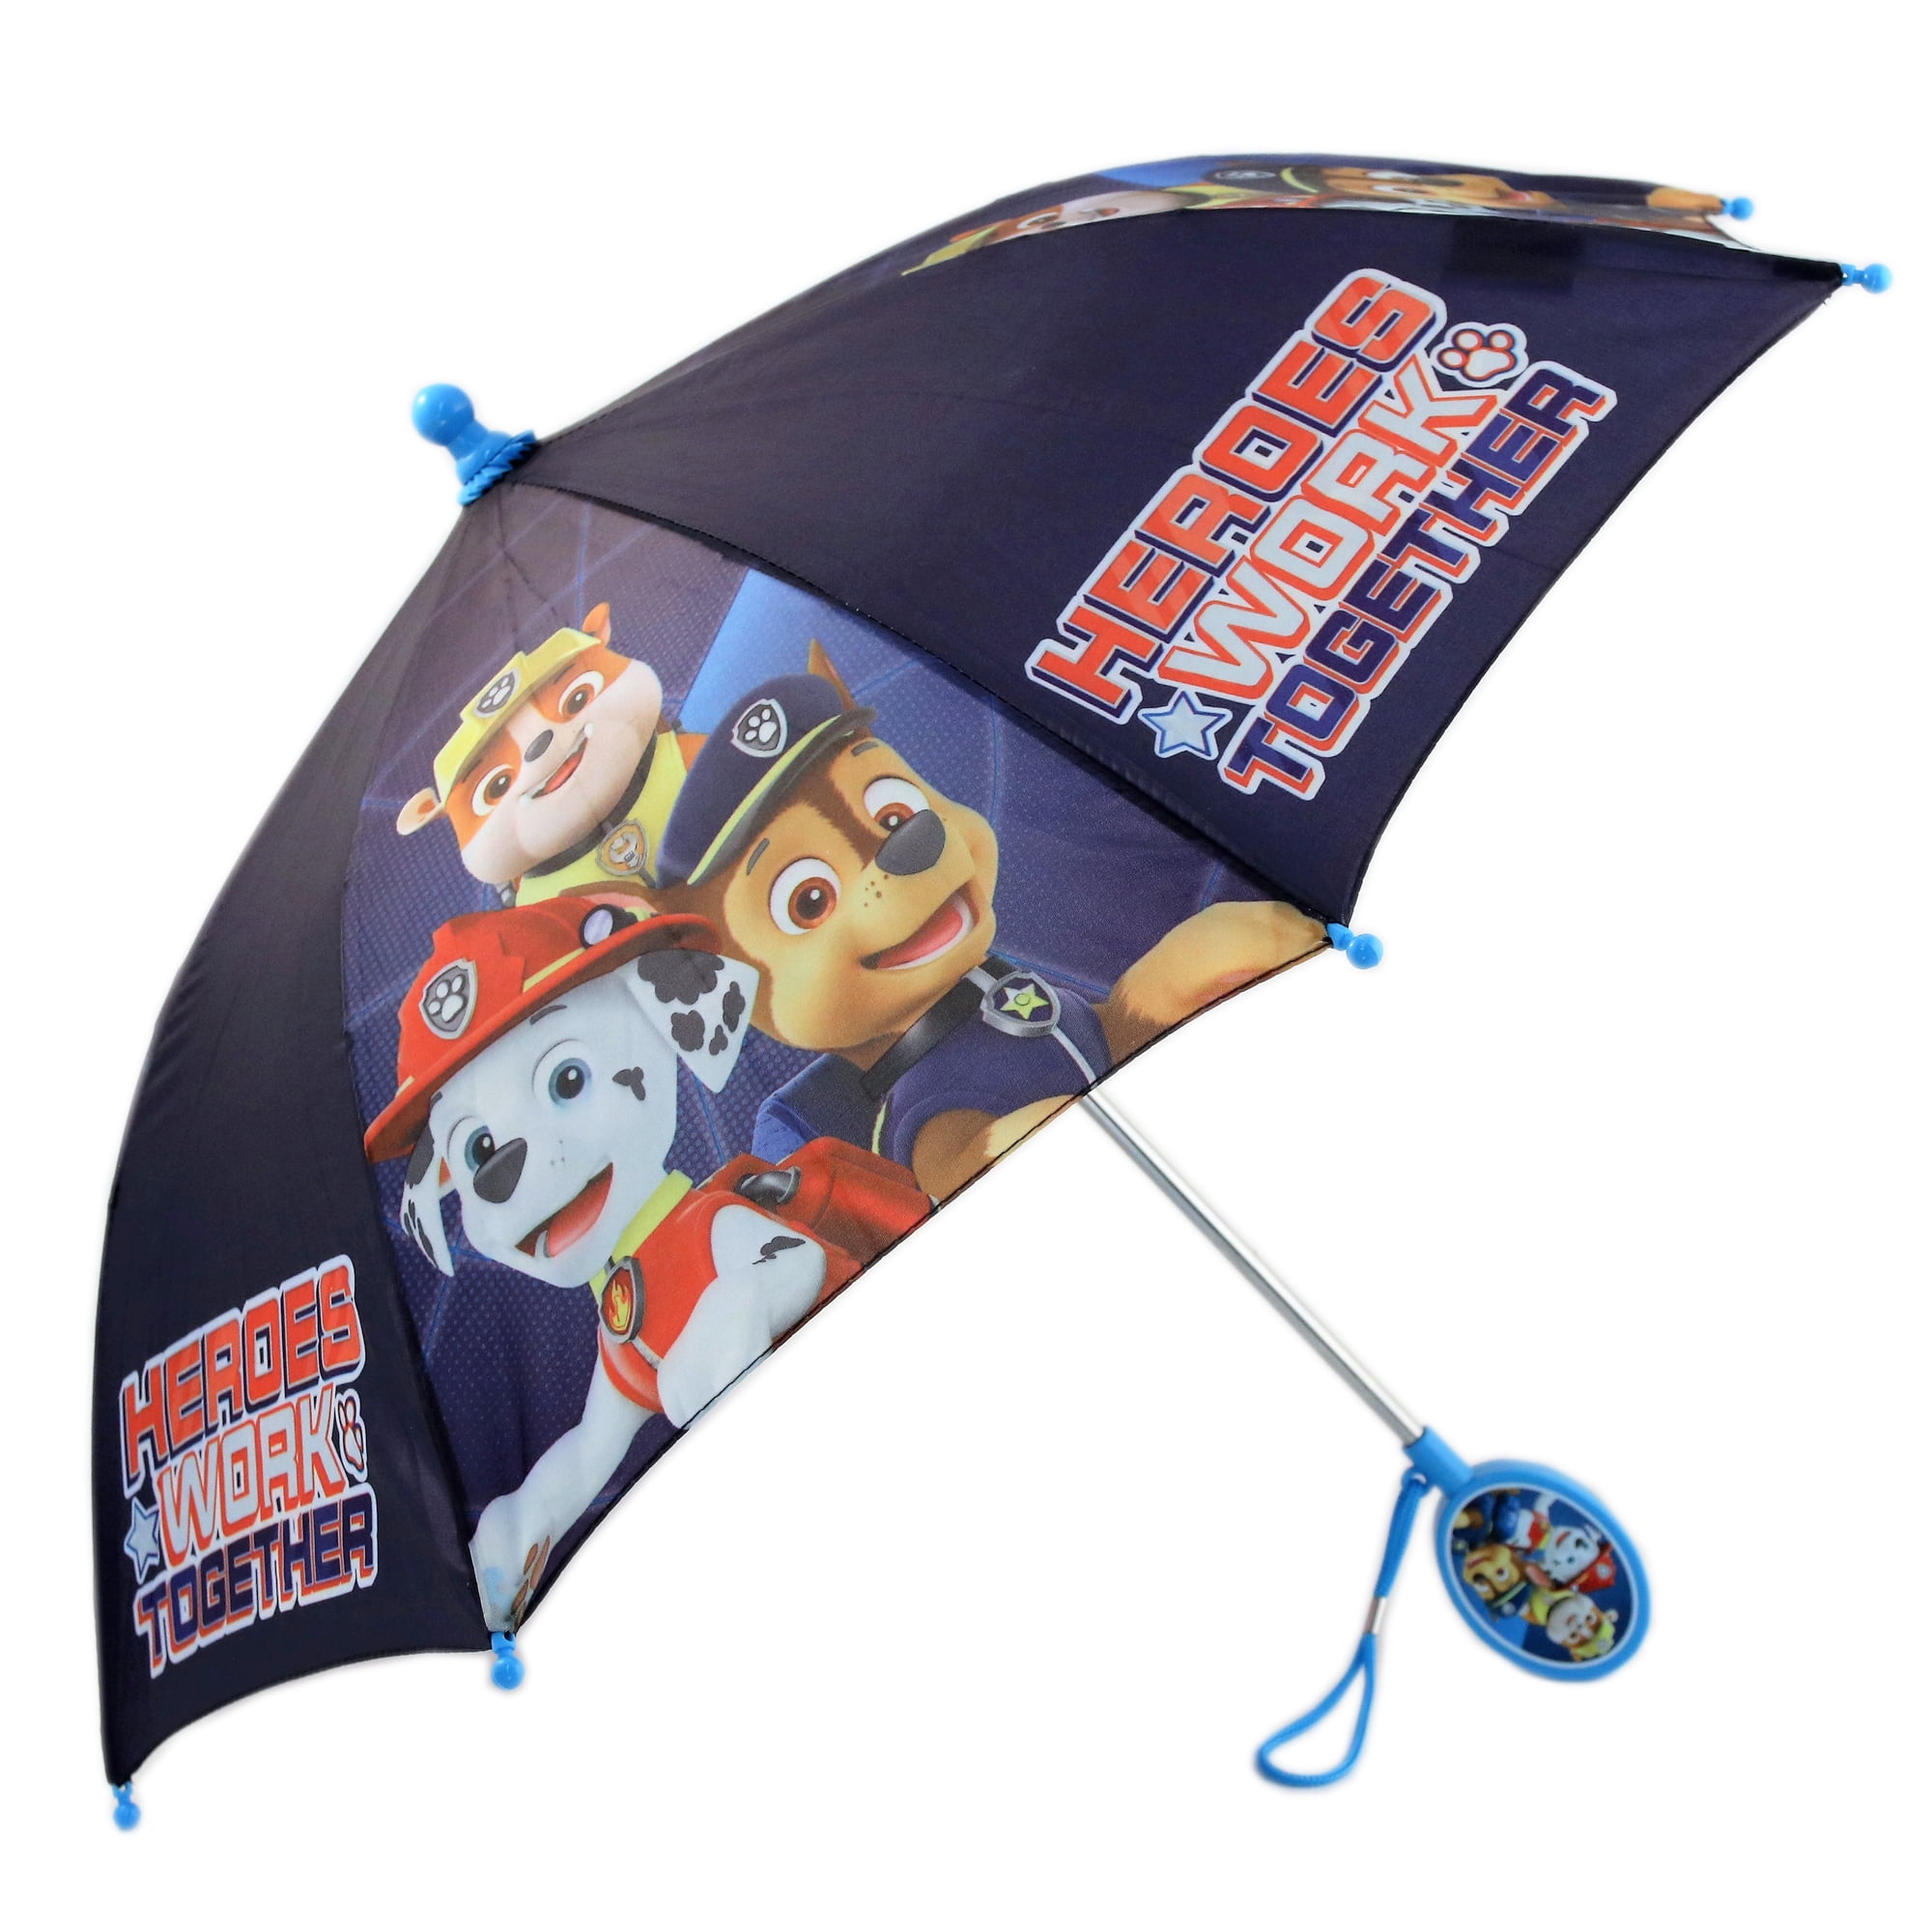 Nickelodeon® Paw Patrol Boys PVC Raincoats Choose from 4 Styles with Chase Design to Front & Back Marshall & Rubble Characters Mutliple Waterproof Lightweight Hooded Raincoat 